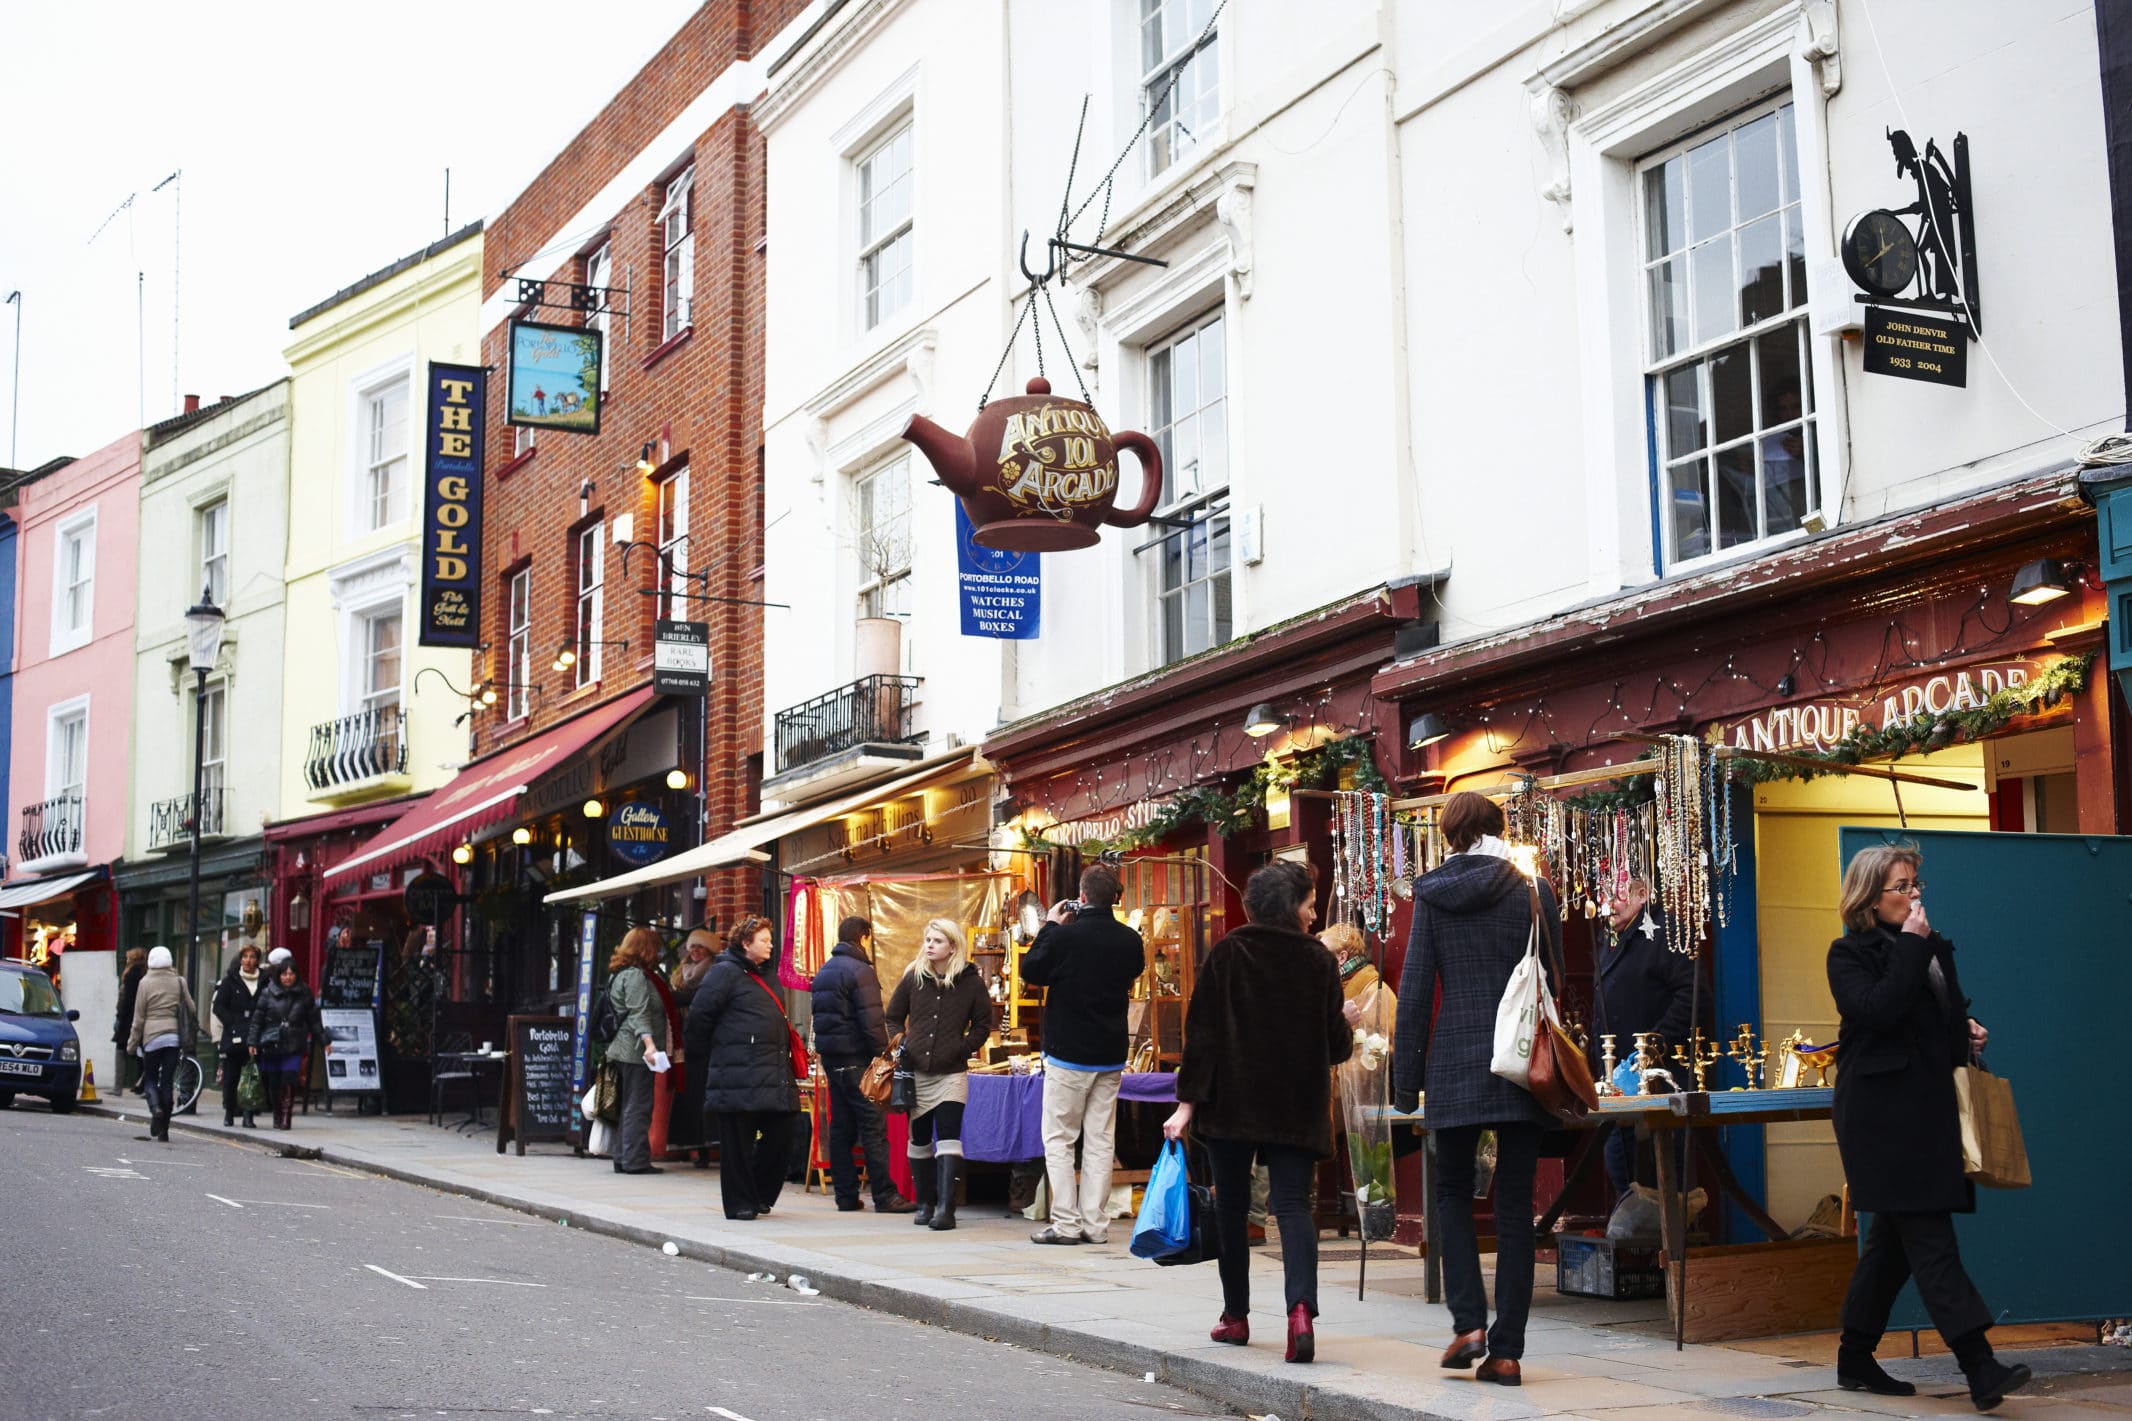 Portobello Road is perfect for people-watching